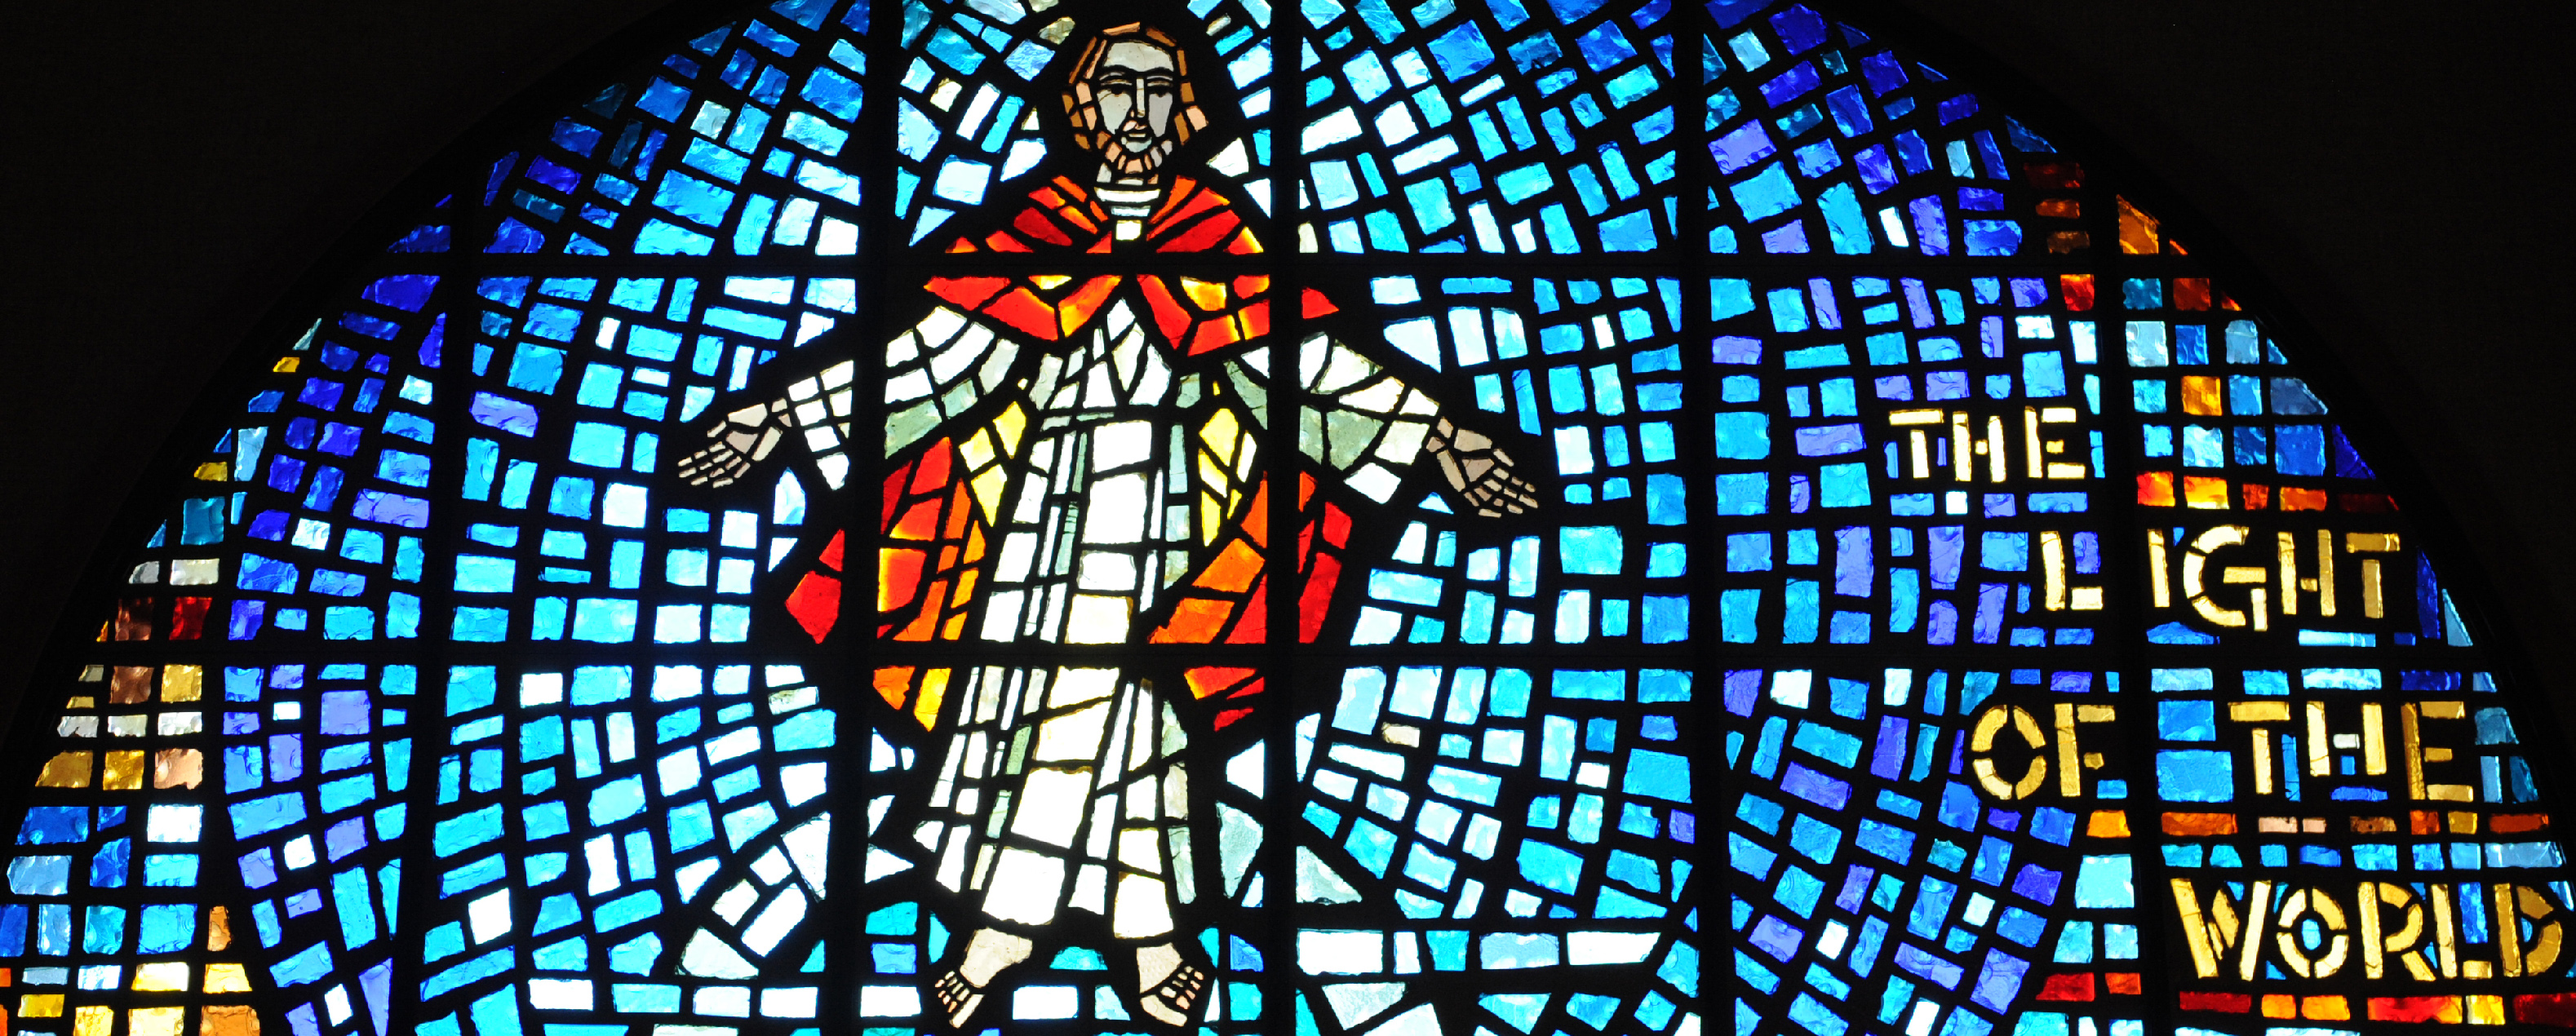 Stained glass window featuring Jesus in white and red robes, surrounded by a blue background. Yellow words on the right side say: The light of the world.